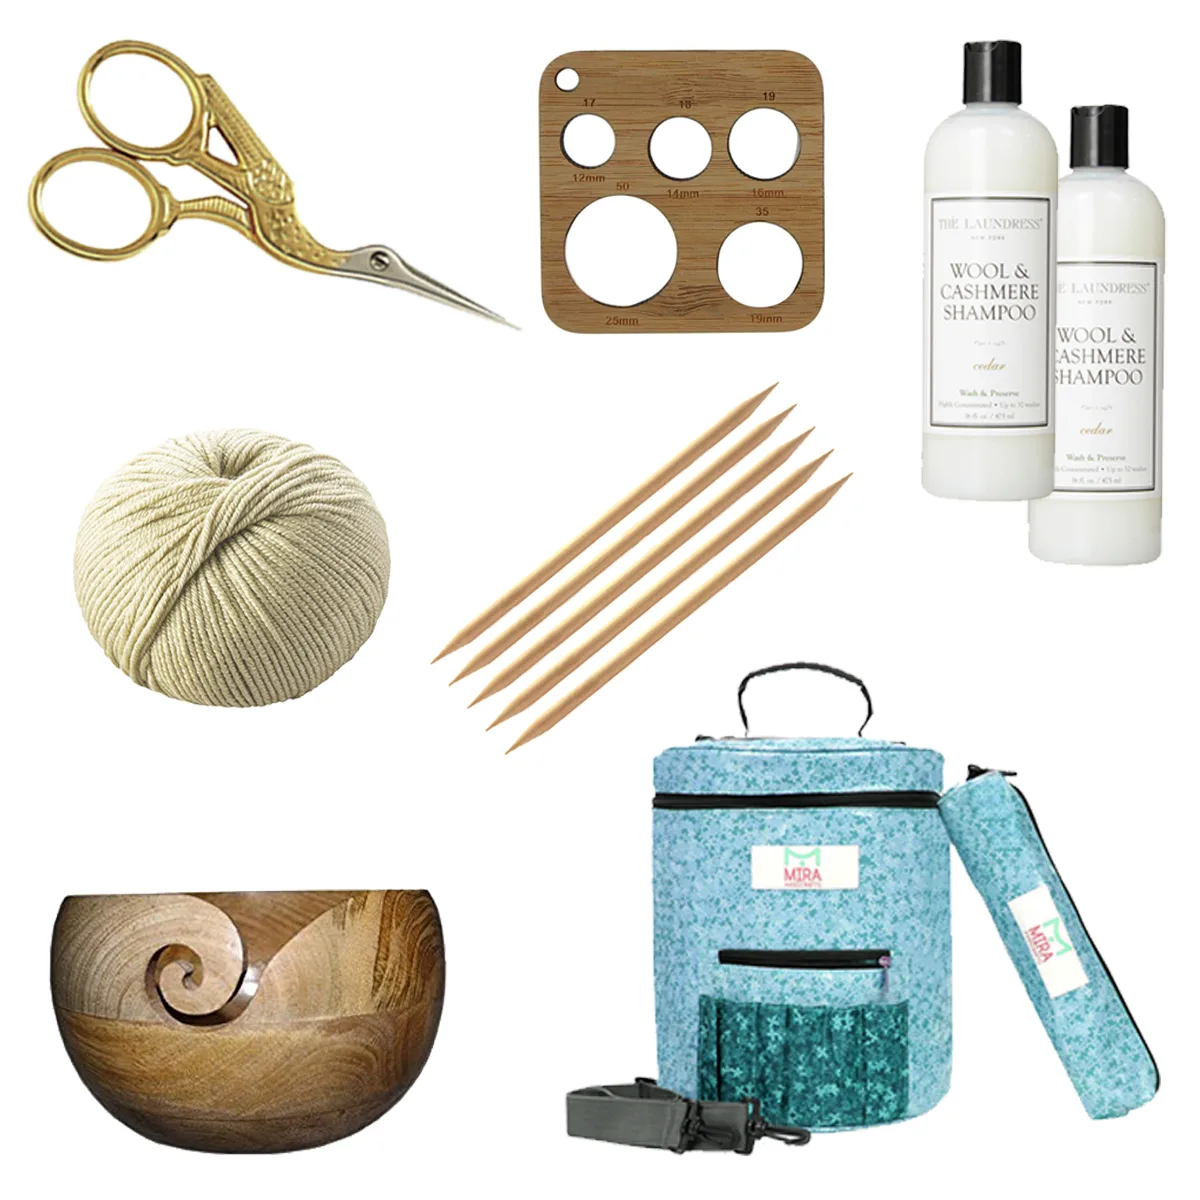 Knitting supplies of scissors, needle gauge, wool shampoo, yarn, double-pointed needles, yarn bowl, and project bag.